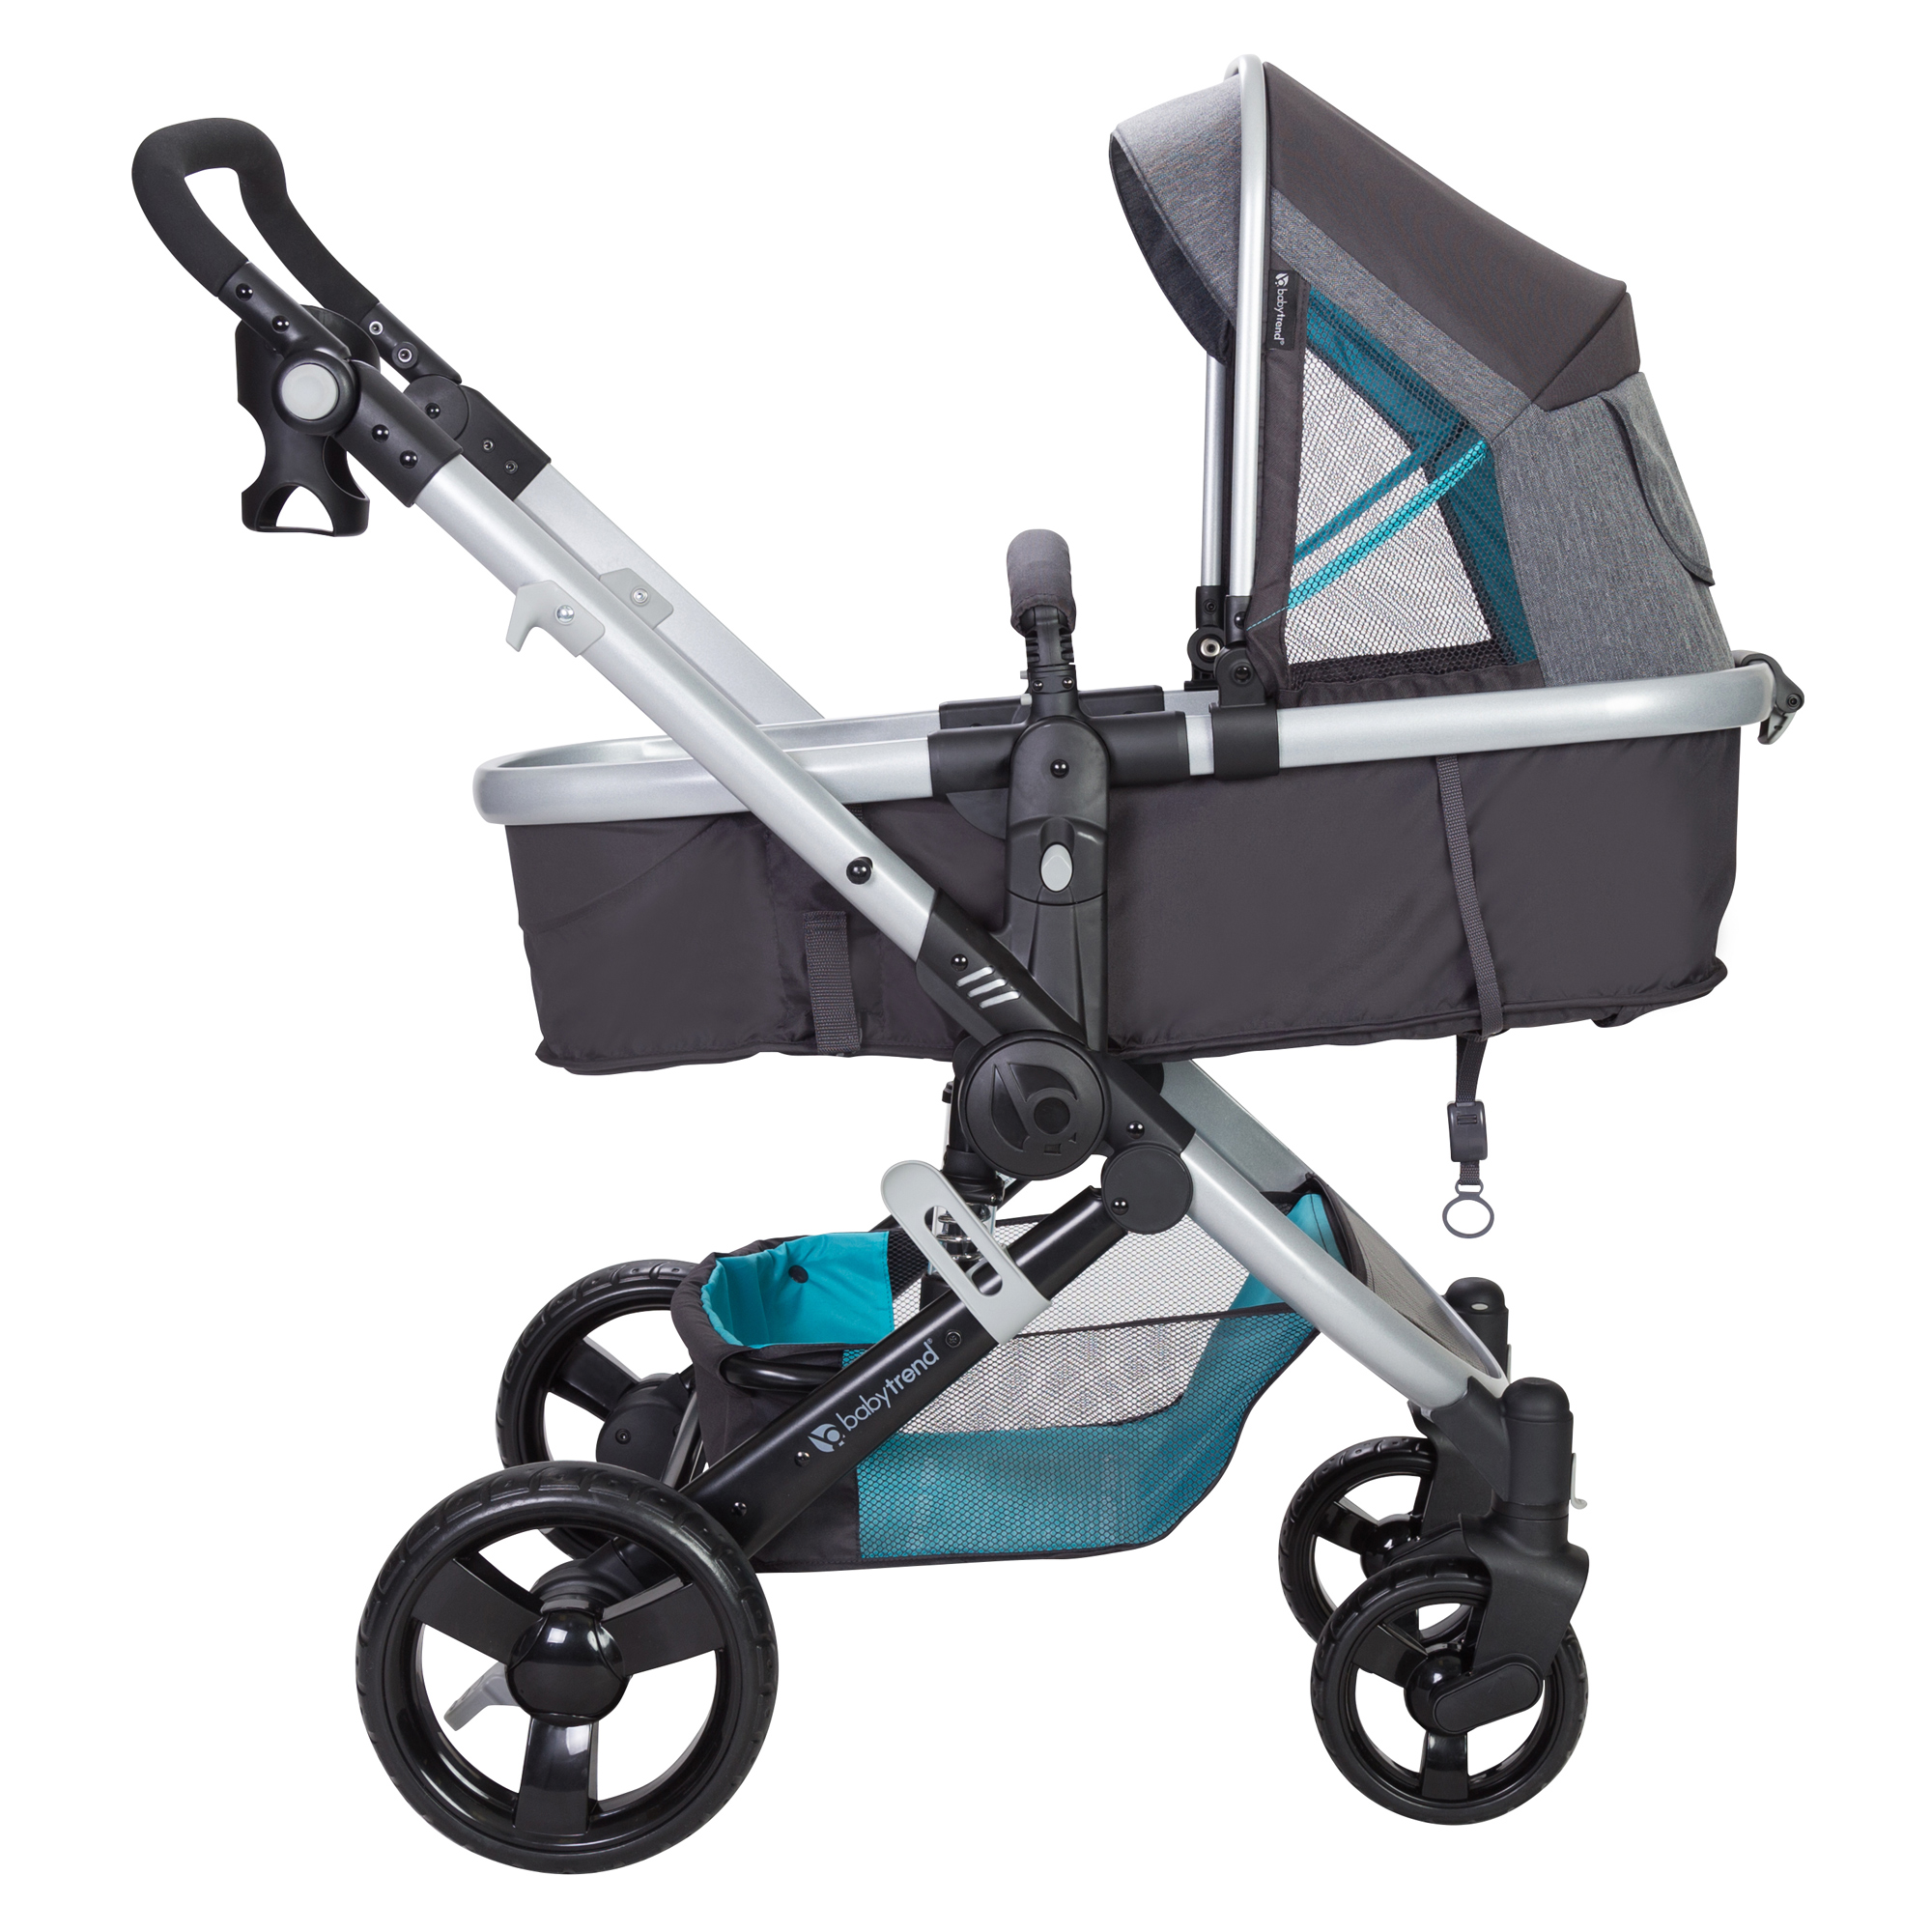 Baby Trend Espy Travel System Stroller, Paramount - image 5 of 6